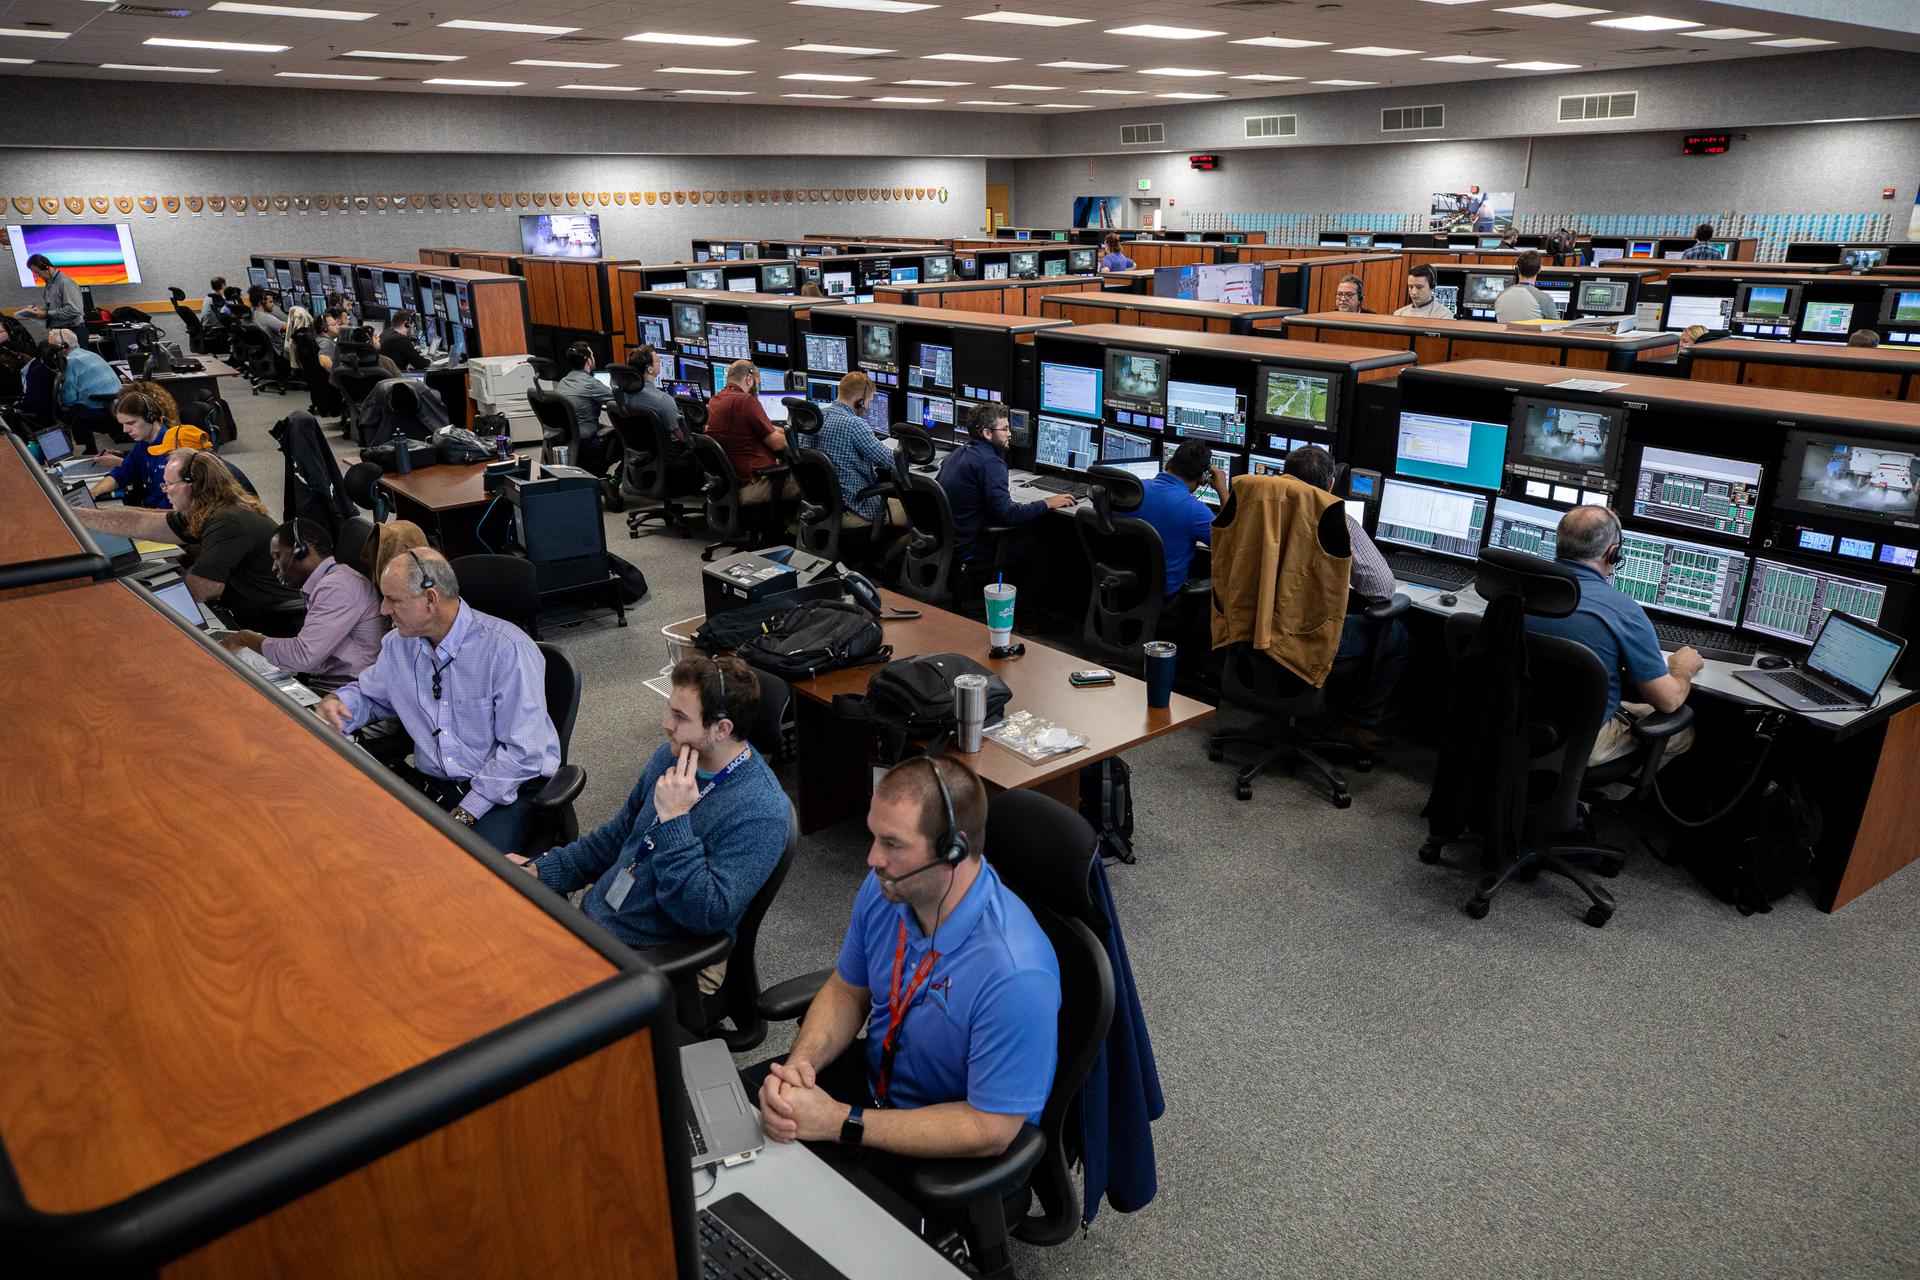 A launch simulation is underway in Launch Control Center Firing Room 1 at NASA's Kennedy Space Center in Florida on Feb. 3, 2020